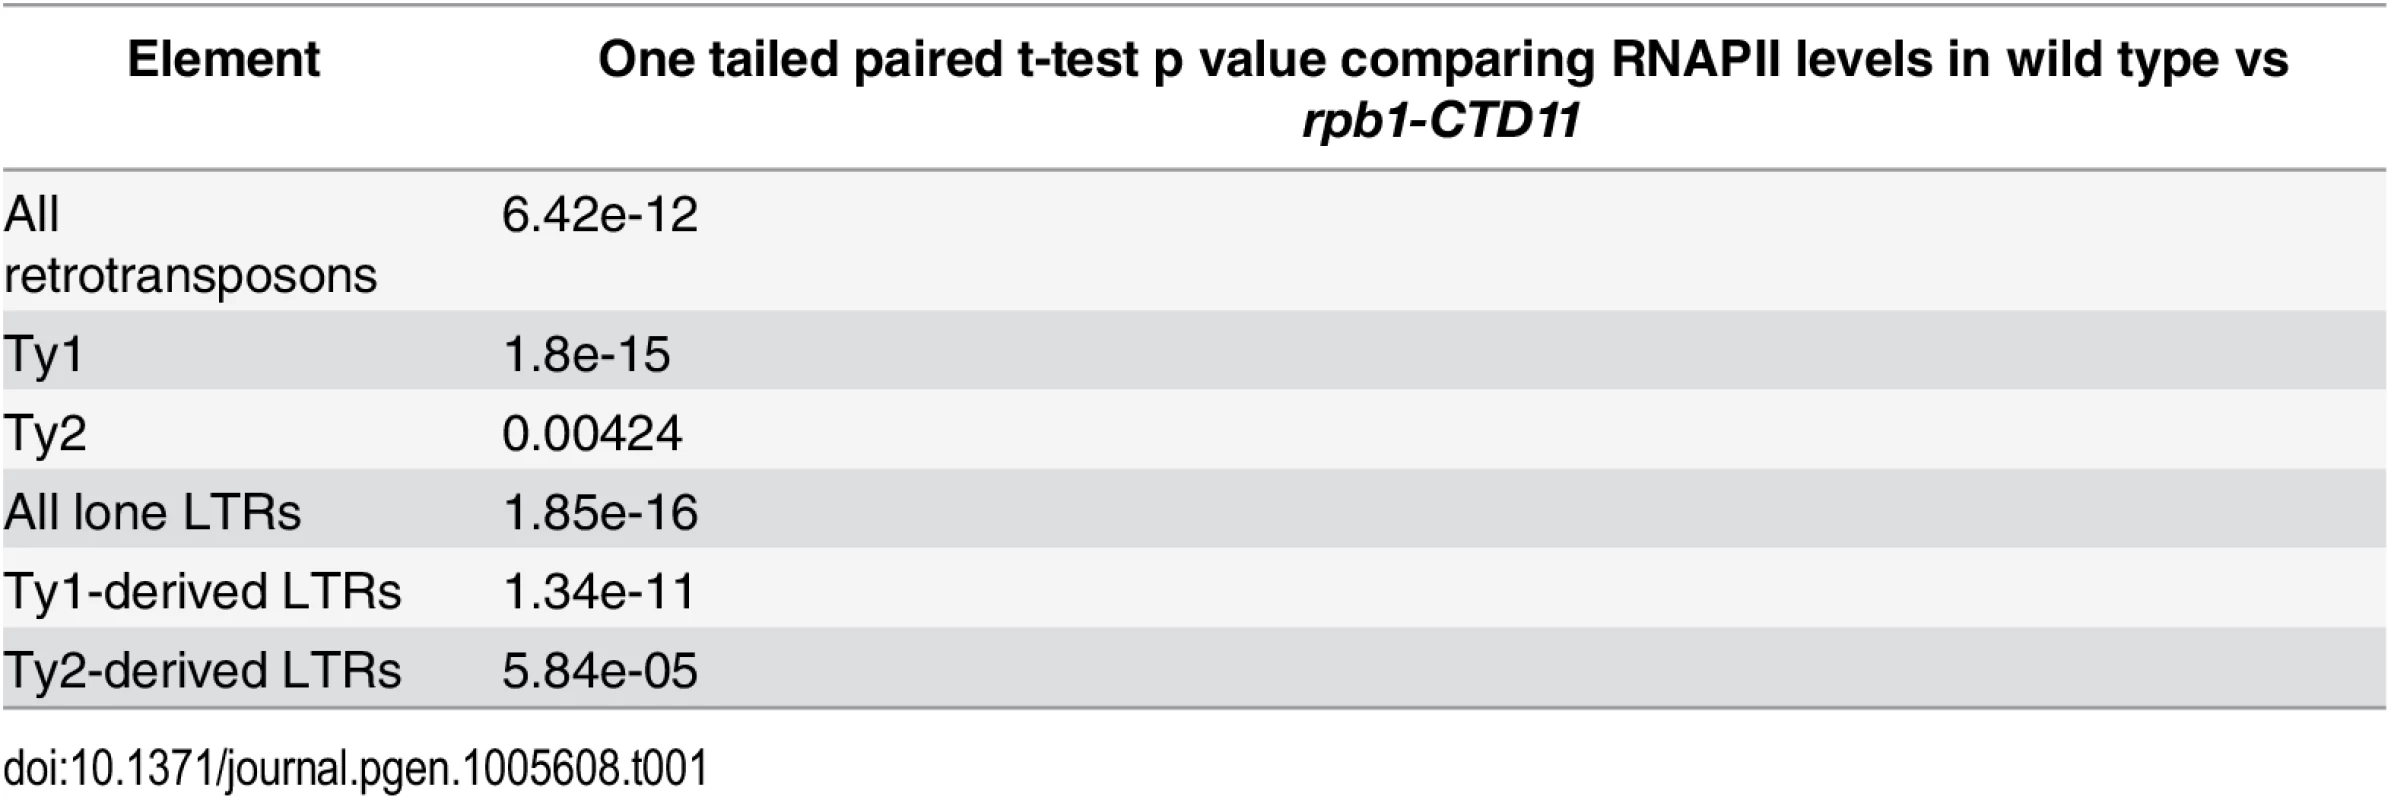 Paired t-test p values comparing RNAPII levels in wild type vs &lt;i&gt;rpb1-CTD11&lt;/i&gt; at Ty1 and Ty1 retrotransposons and derived-LTRs.